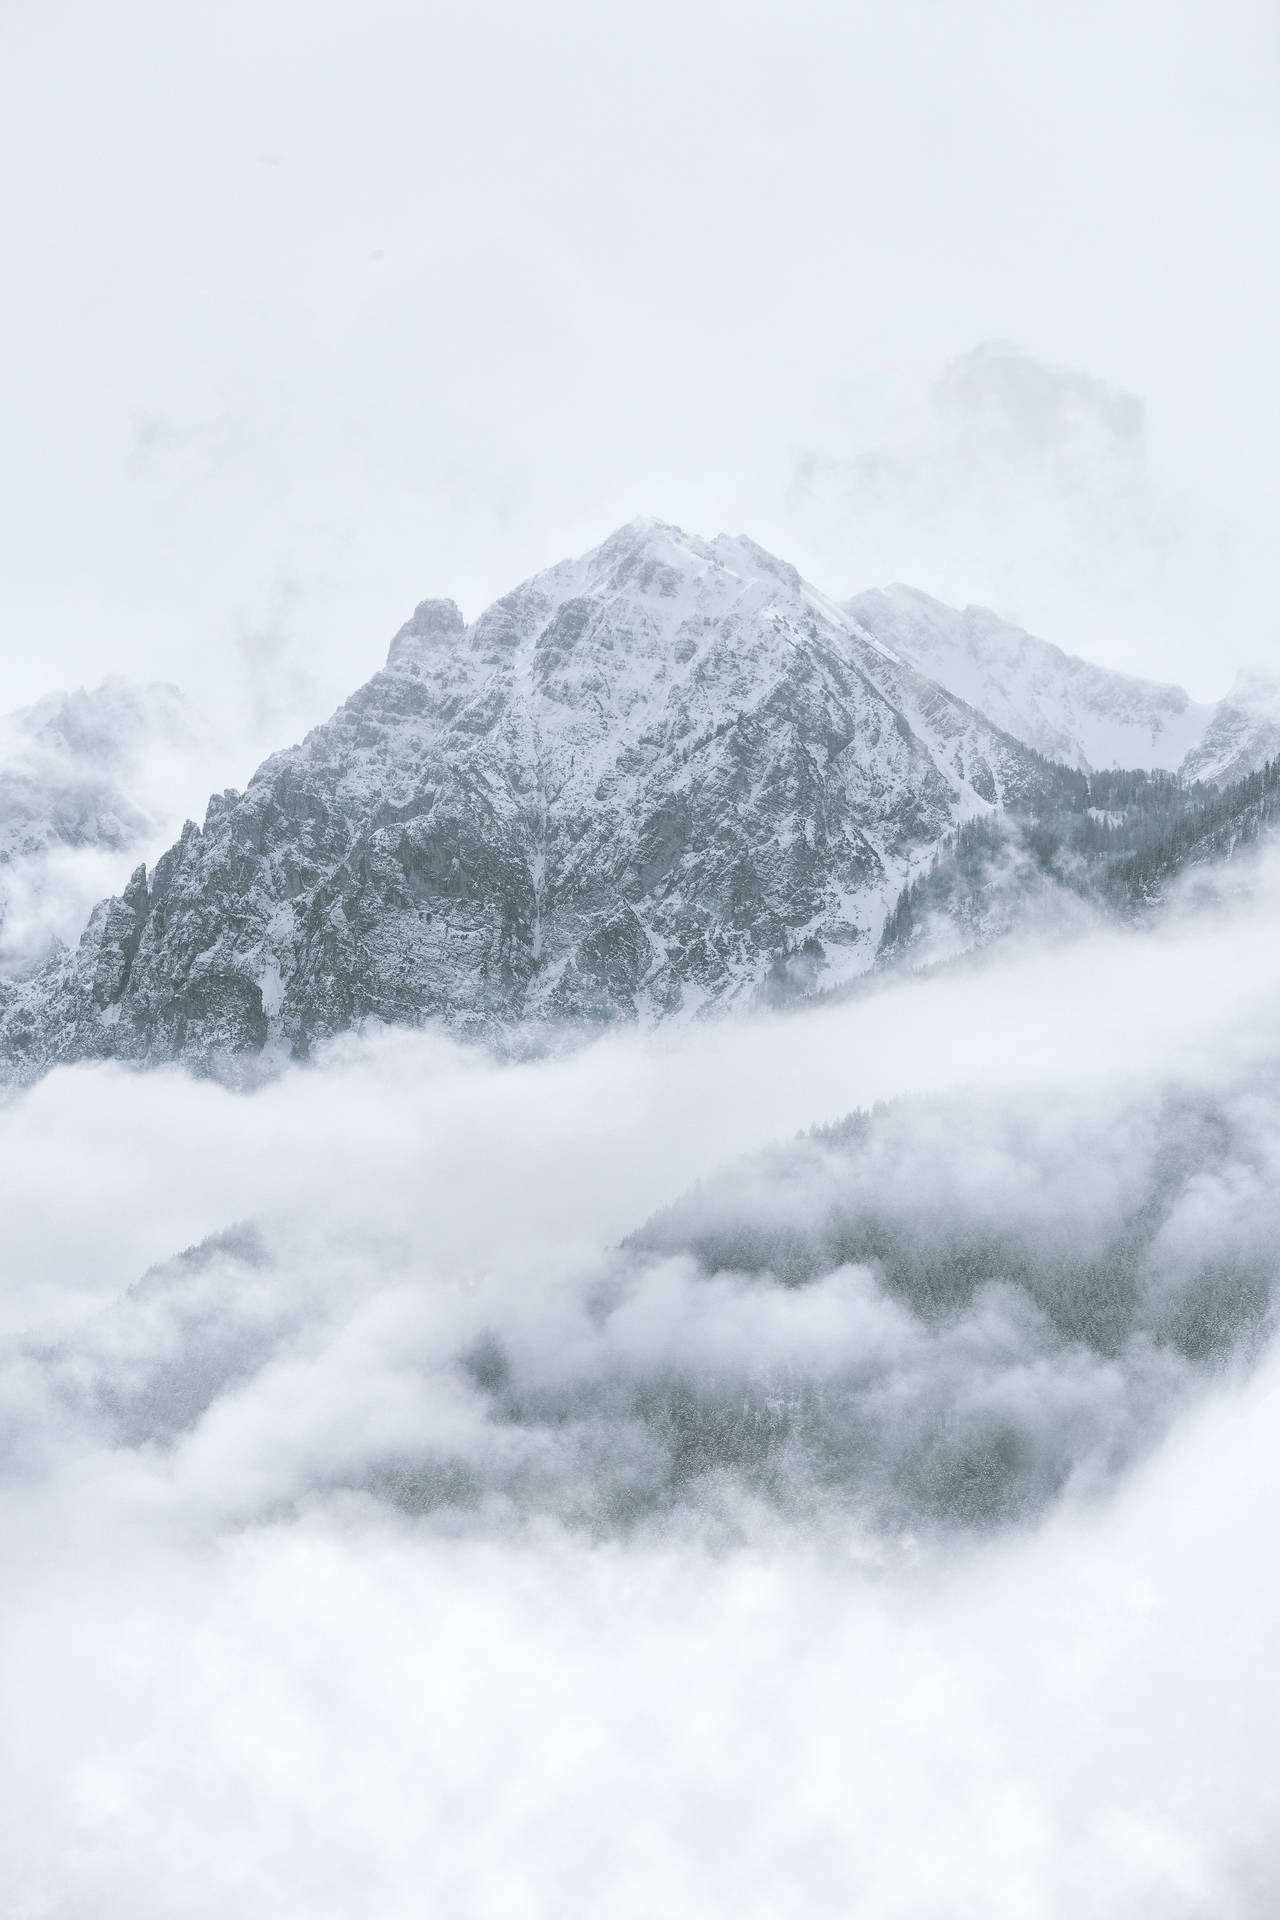 Snowstorm Mountain During Cool Winter Wallpaper